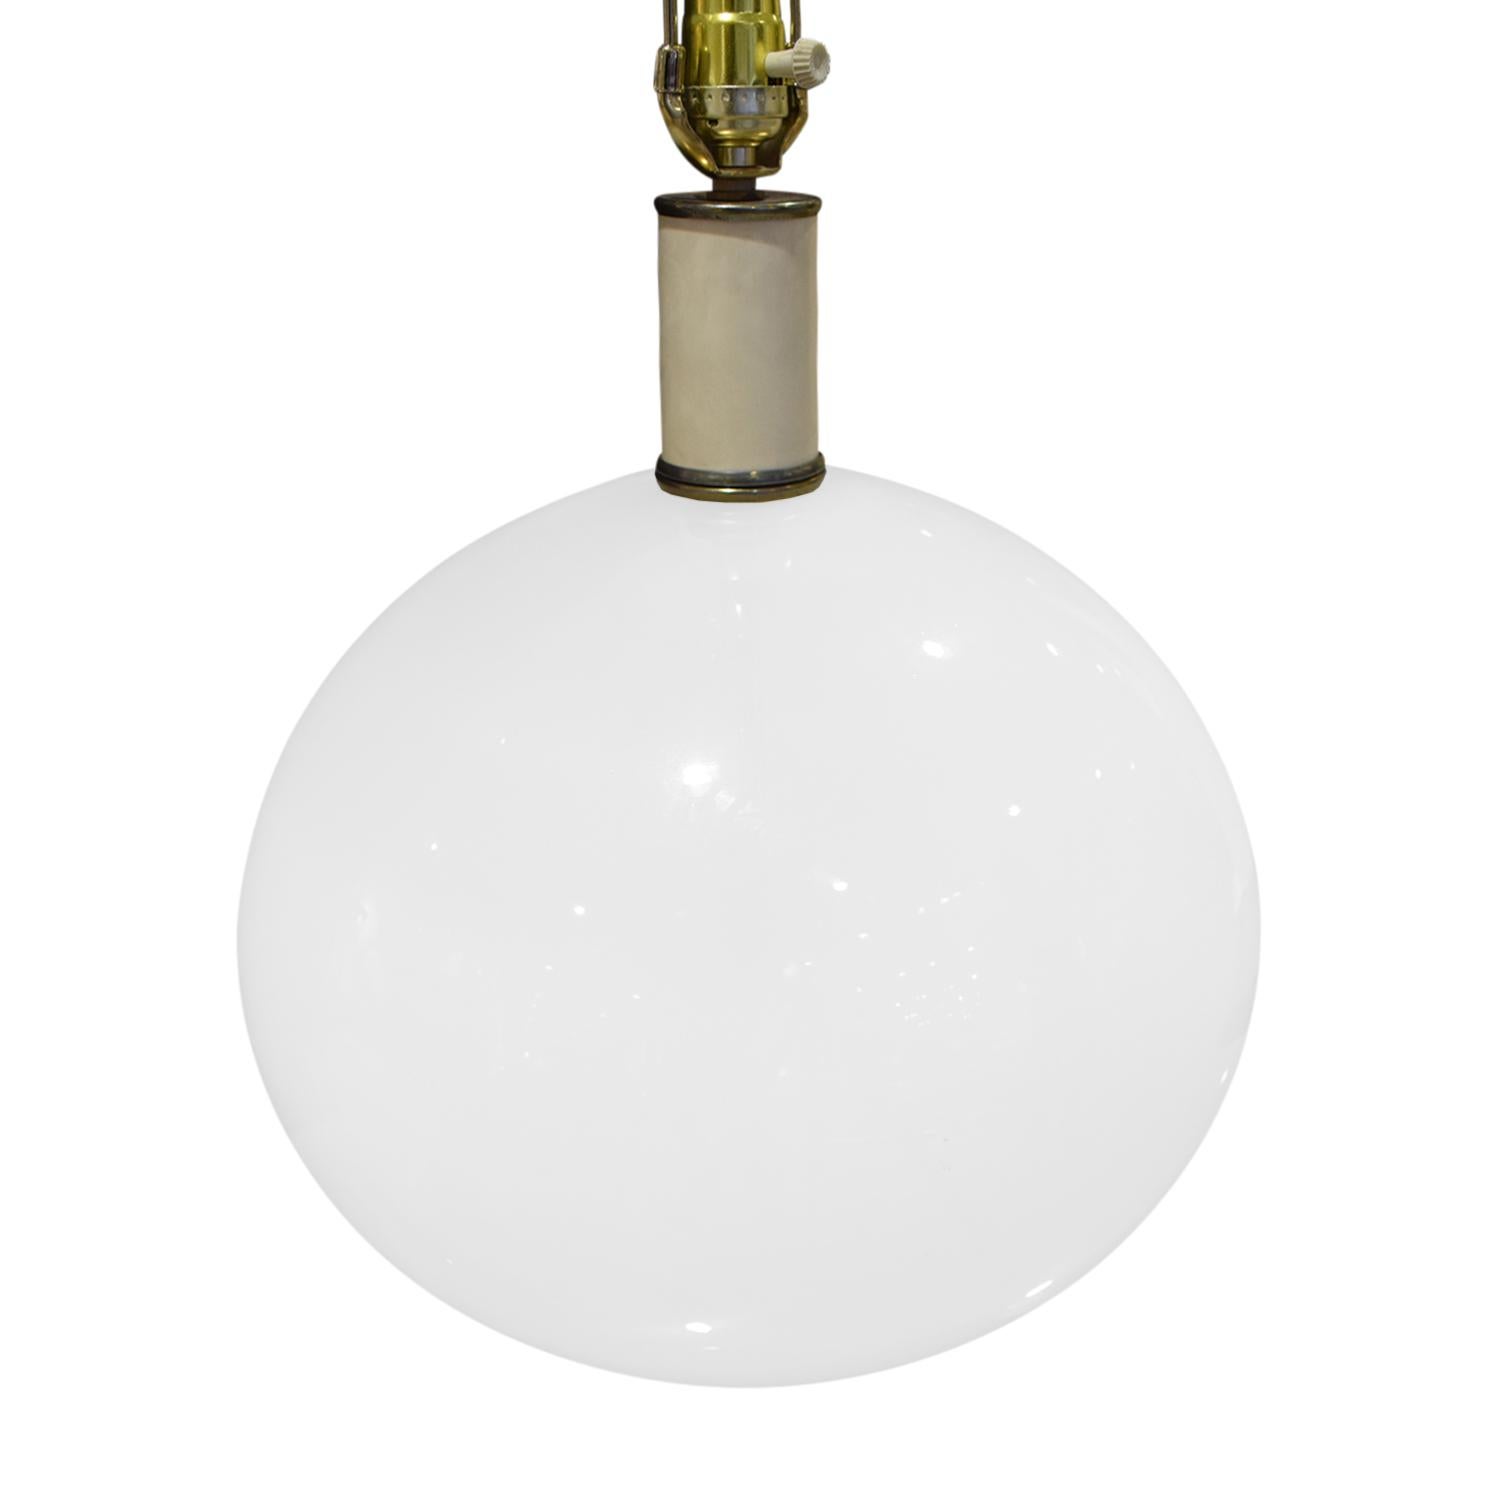 Italian Elegant Table Lamp in White Glass with Brass Base, 1960s For Sale